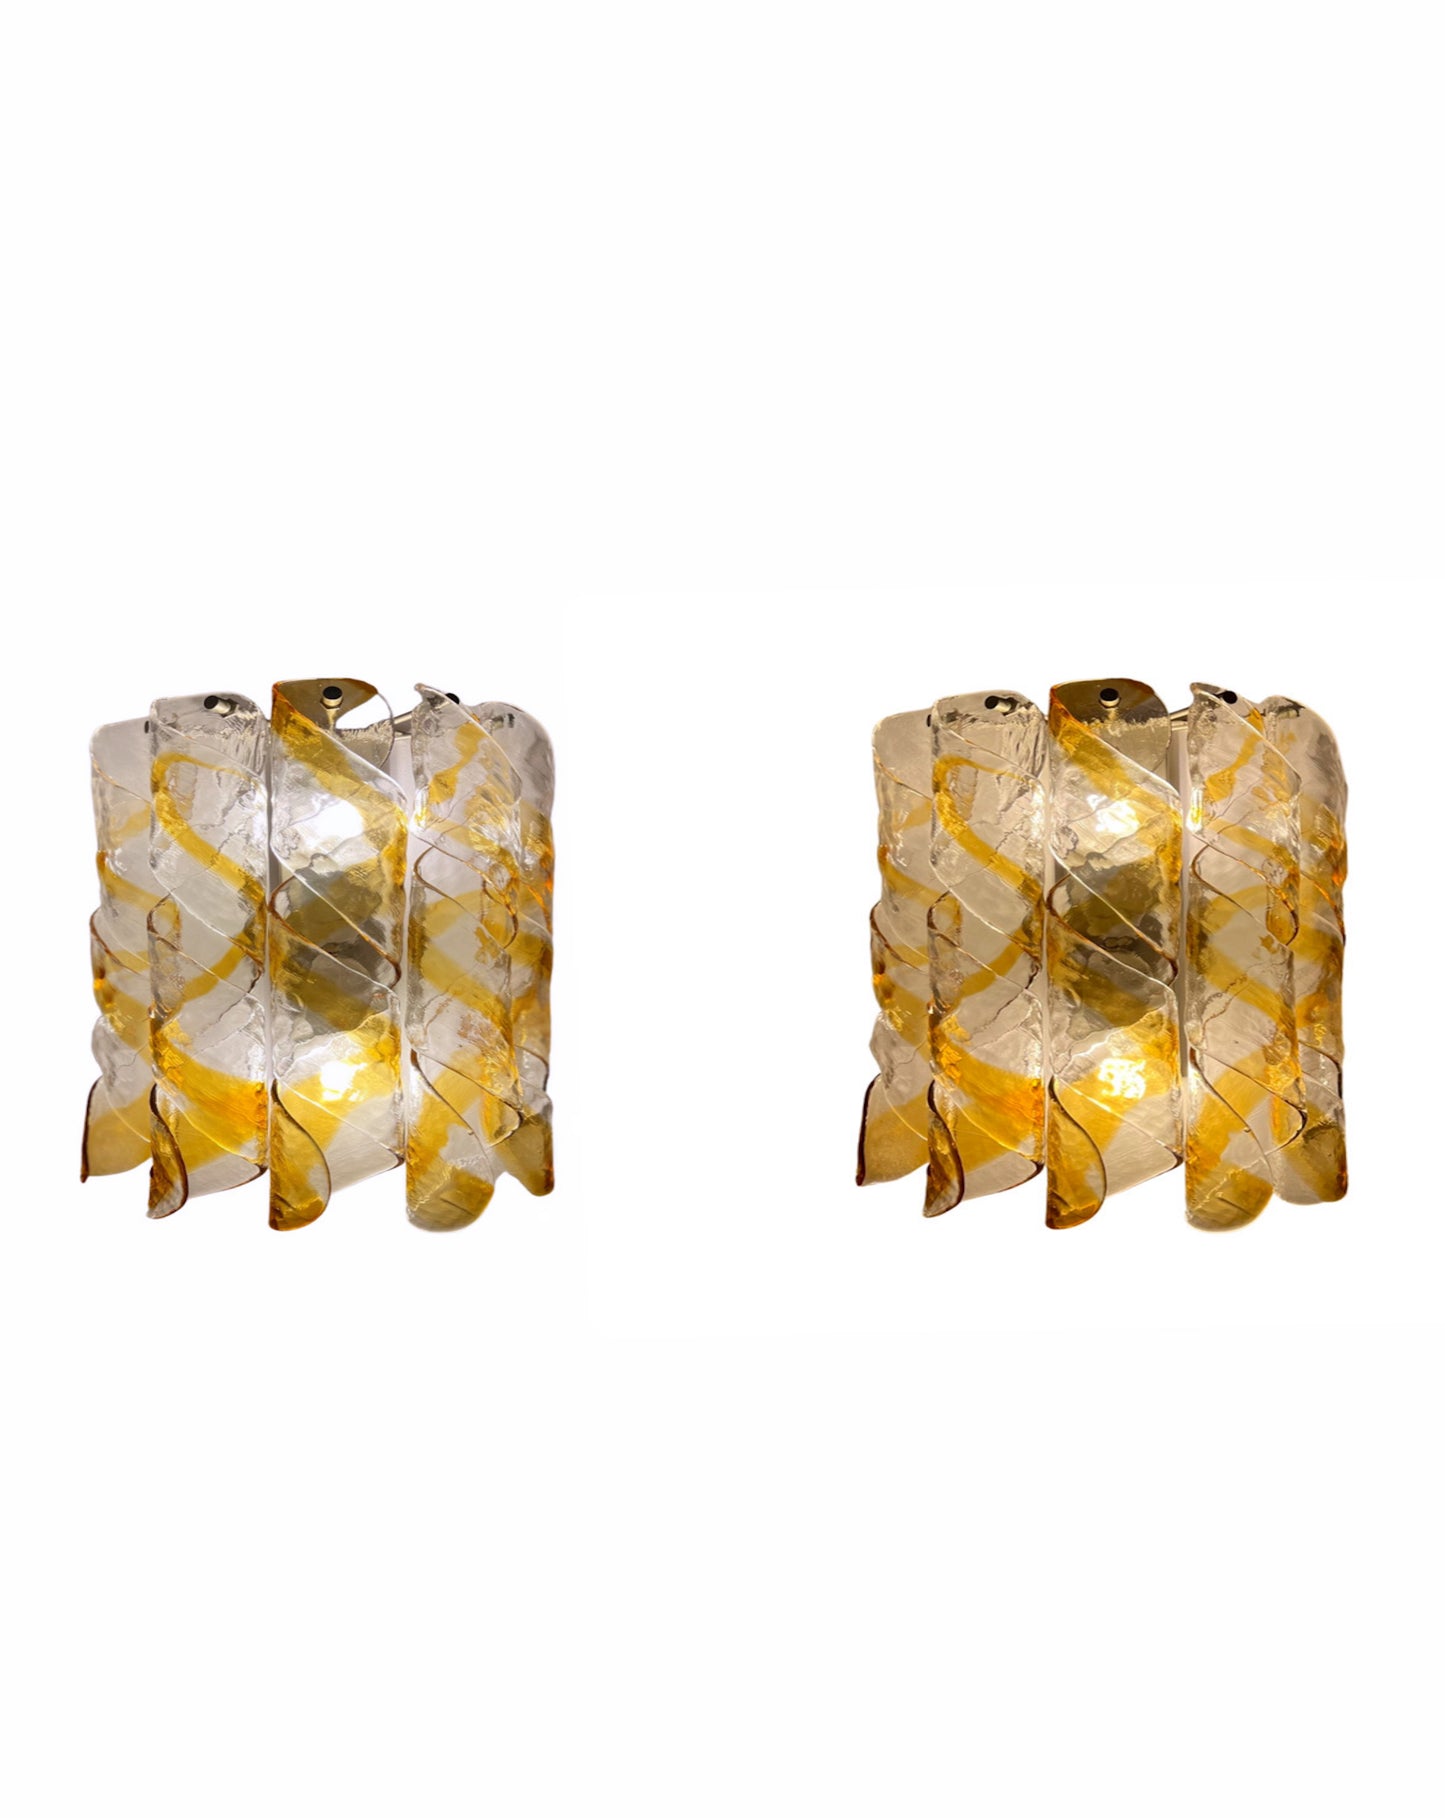 "Torciglione" Murano Wall Lamp by Mazzega, 1970s